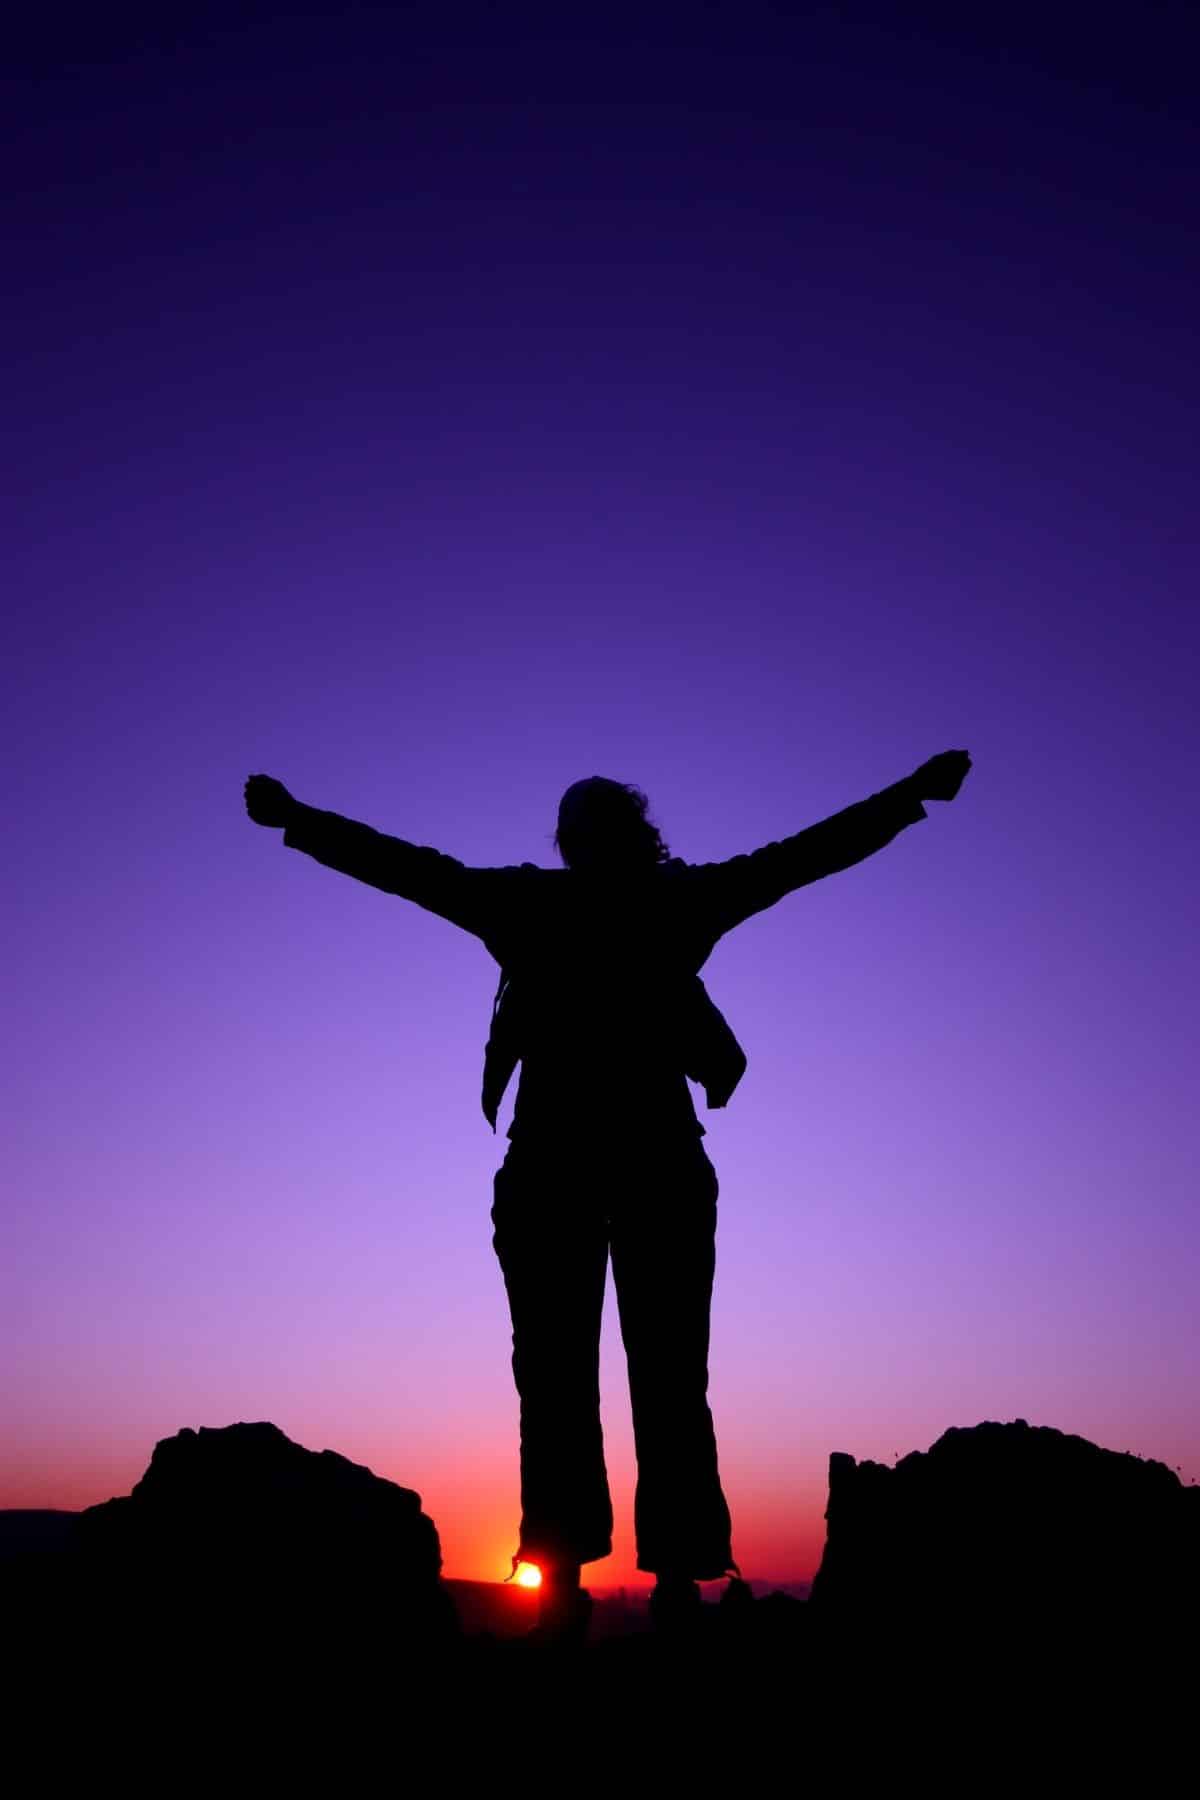 woman at sunset at the top of a mountain with her arms raised